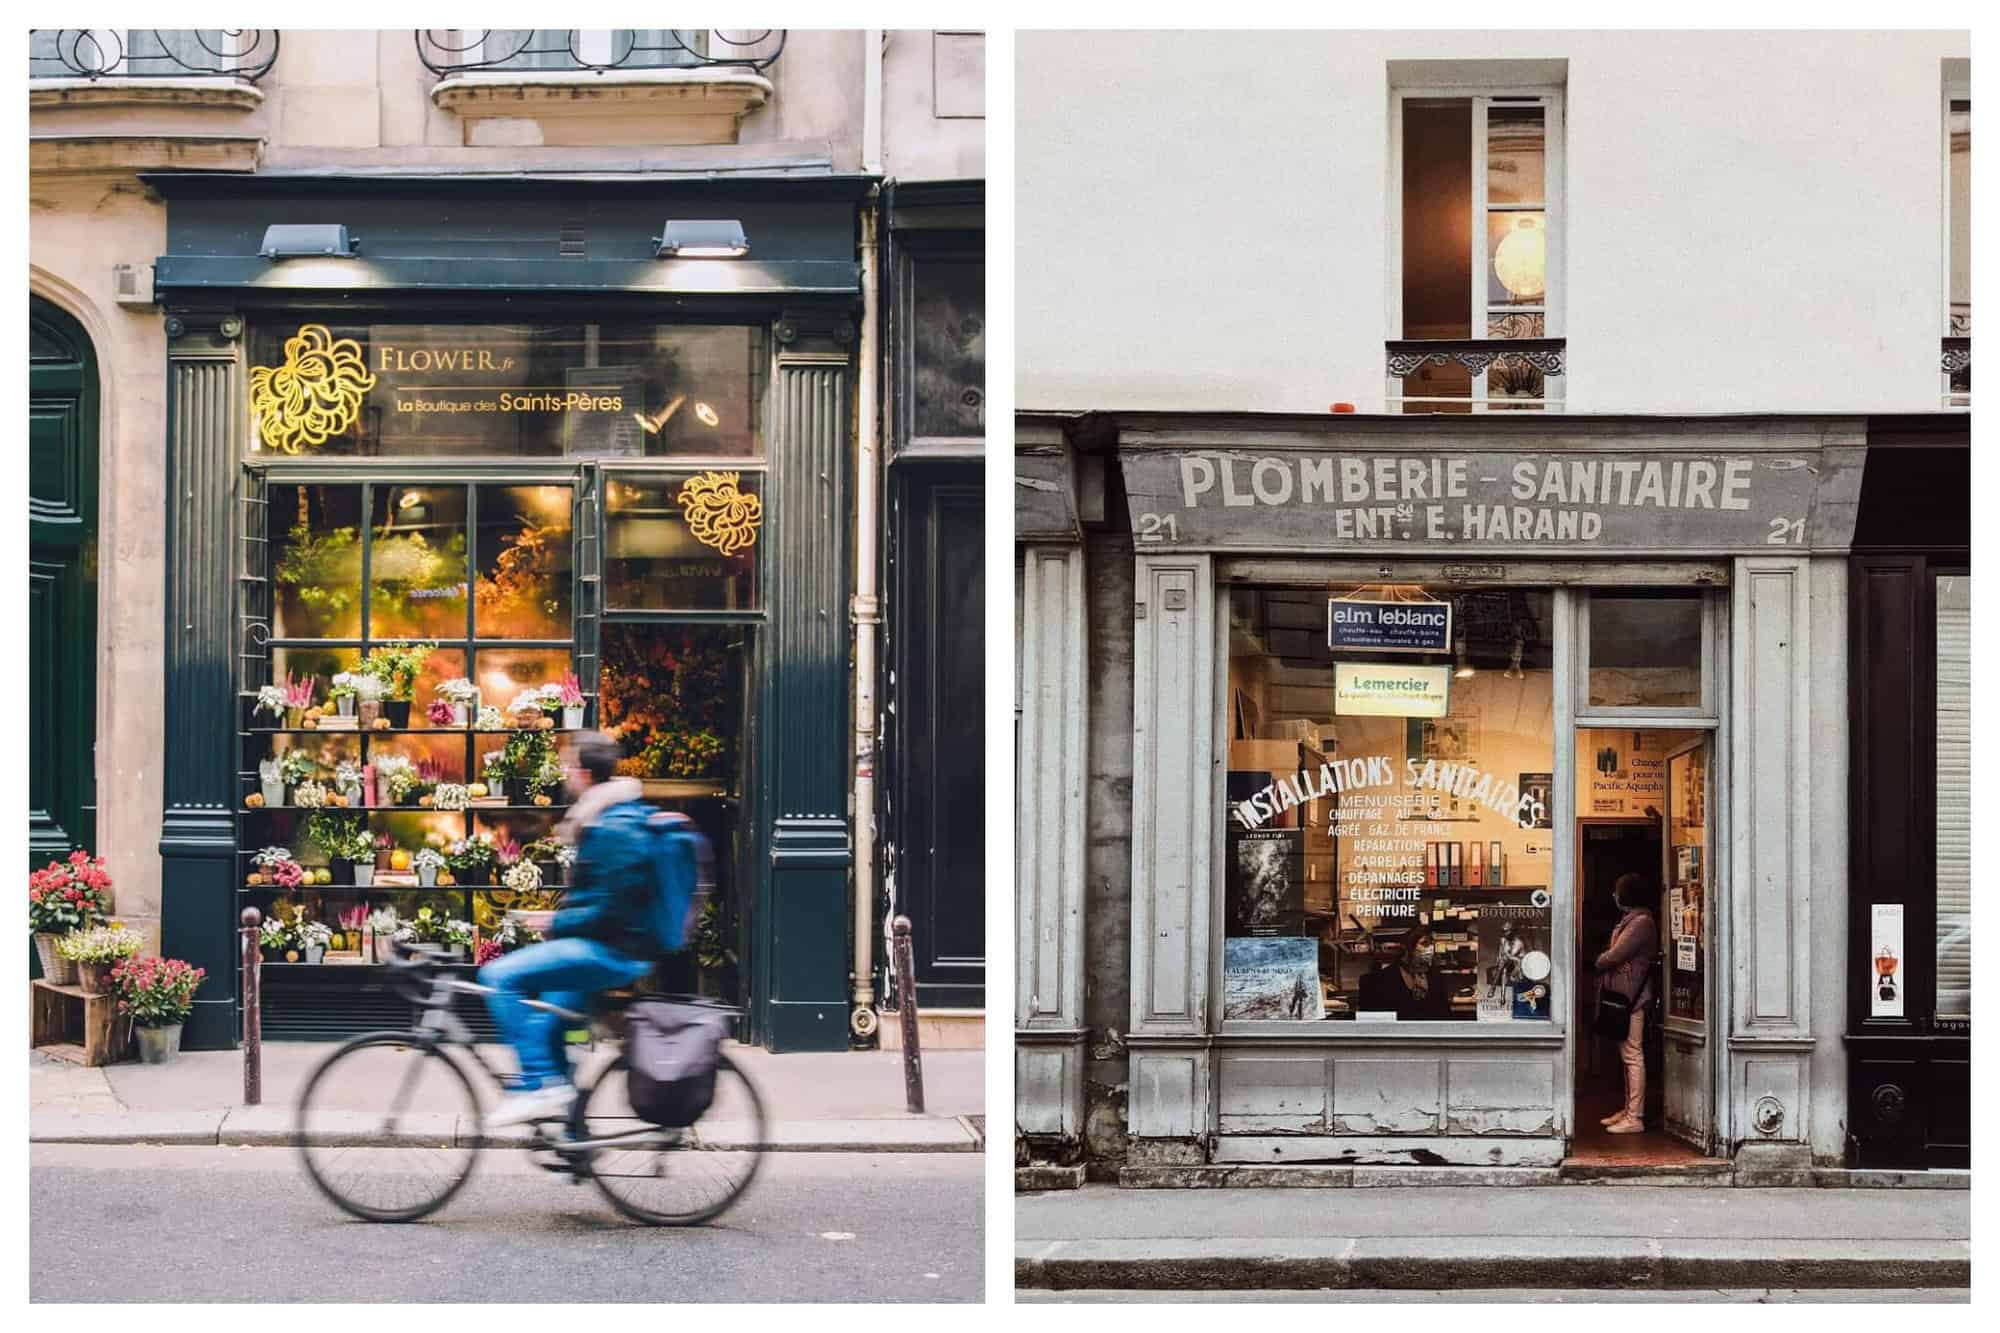 Left: a photo of a flower boutique in Paris, with a biker biking past. Right: a photo of a plumbing shop in Paris.